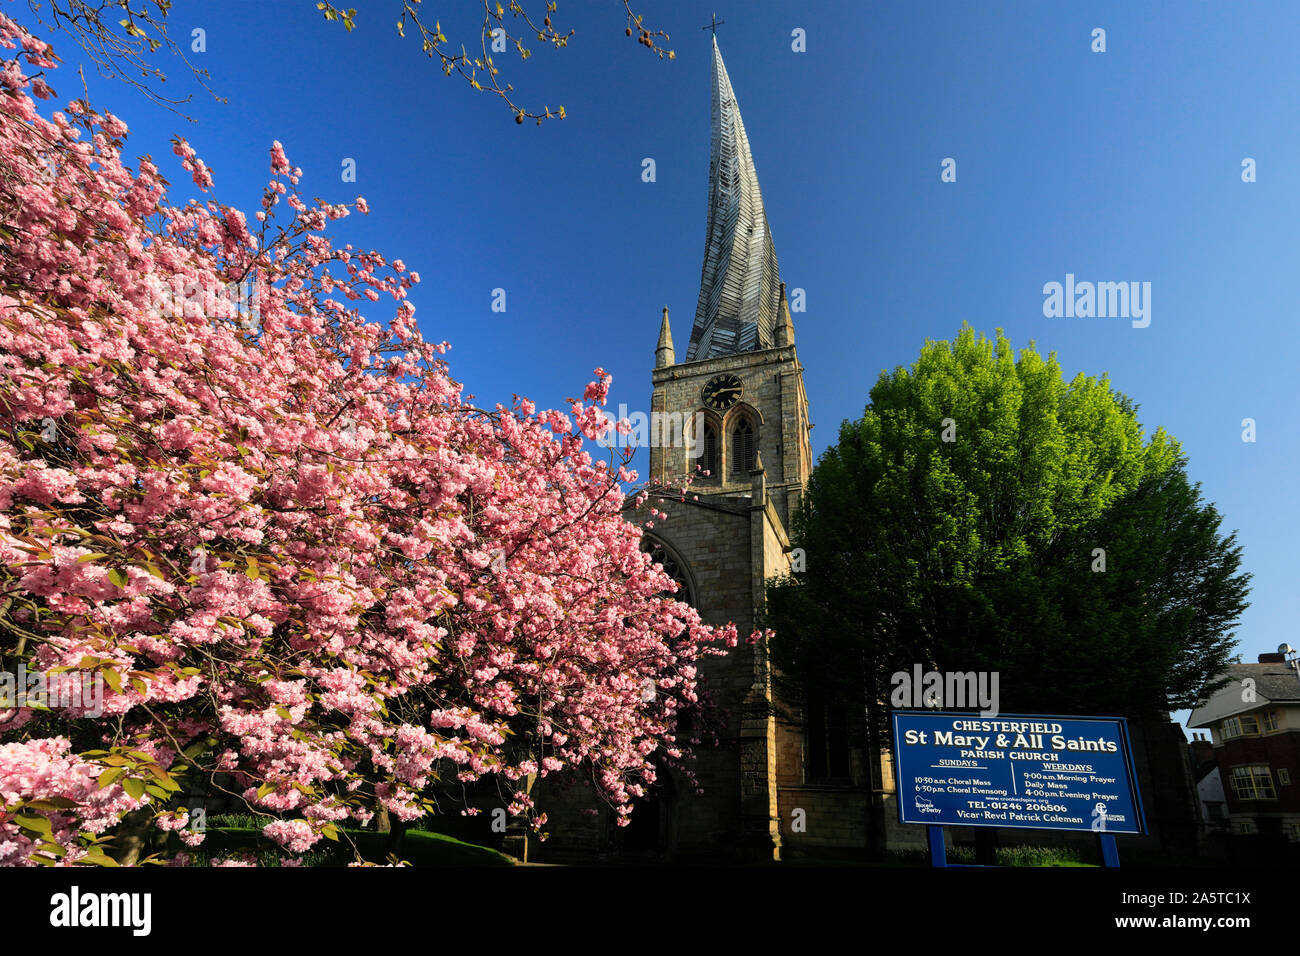 The Crooked Spire of St Mary and All saints Church, Chesterfield market town, Derbyshire, England, UK Stock Photo